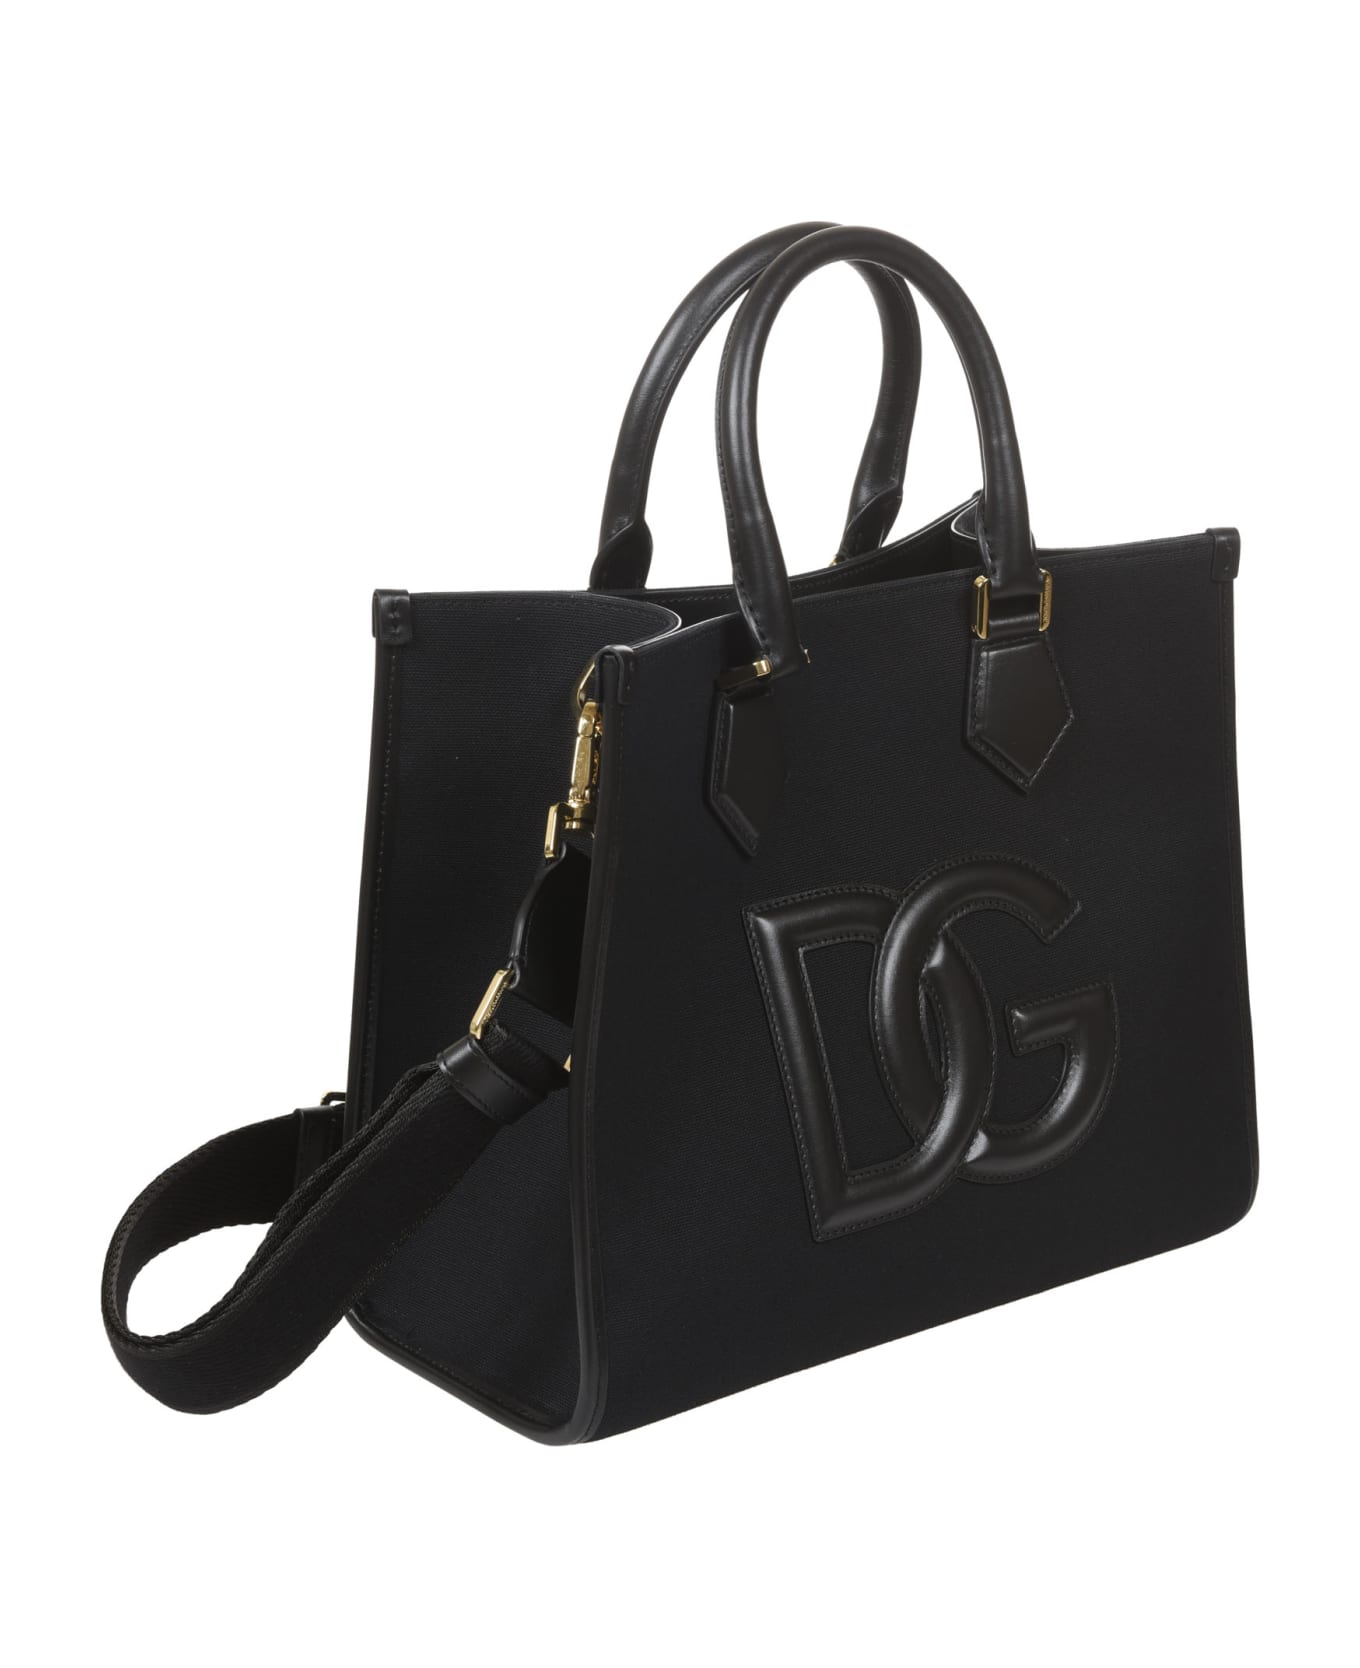 Dolce & Gabbana Logo Patched Top Handle Tote - Black トートバッグ